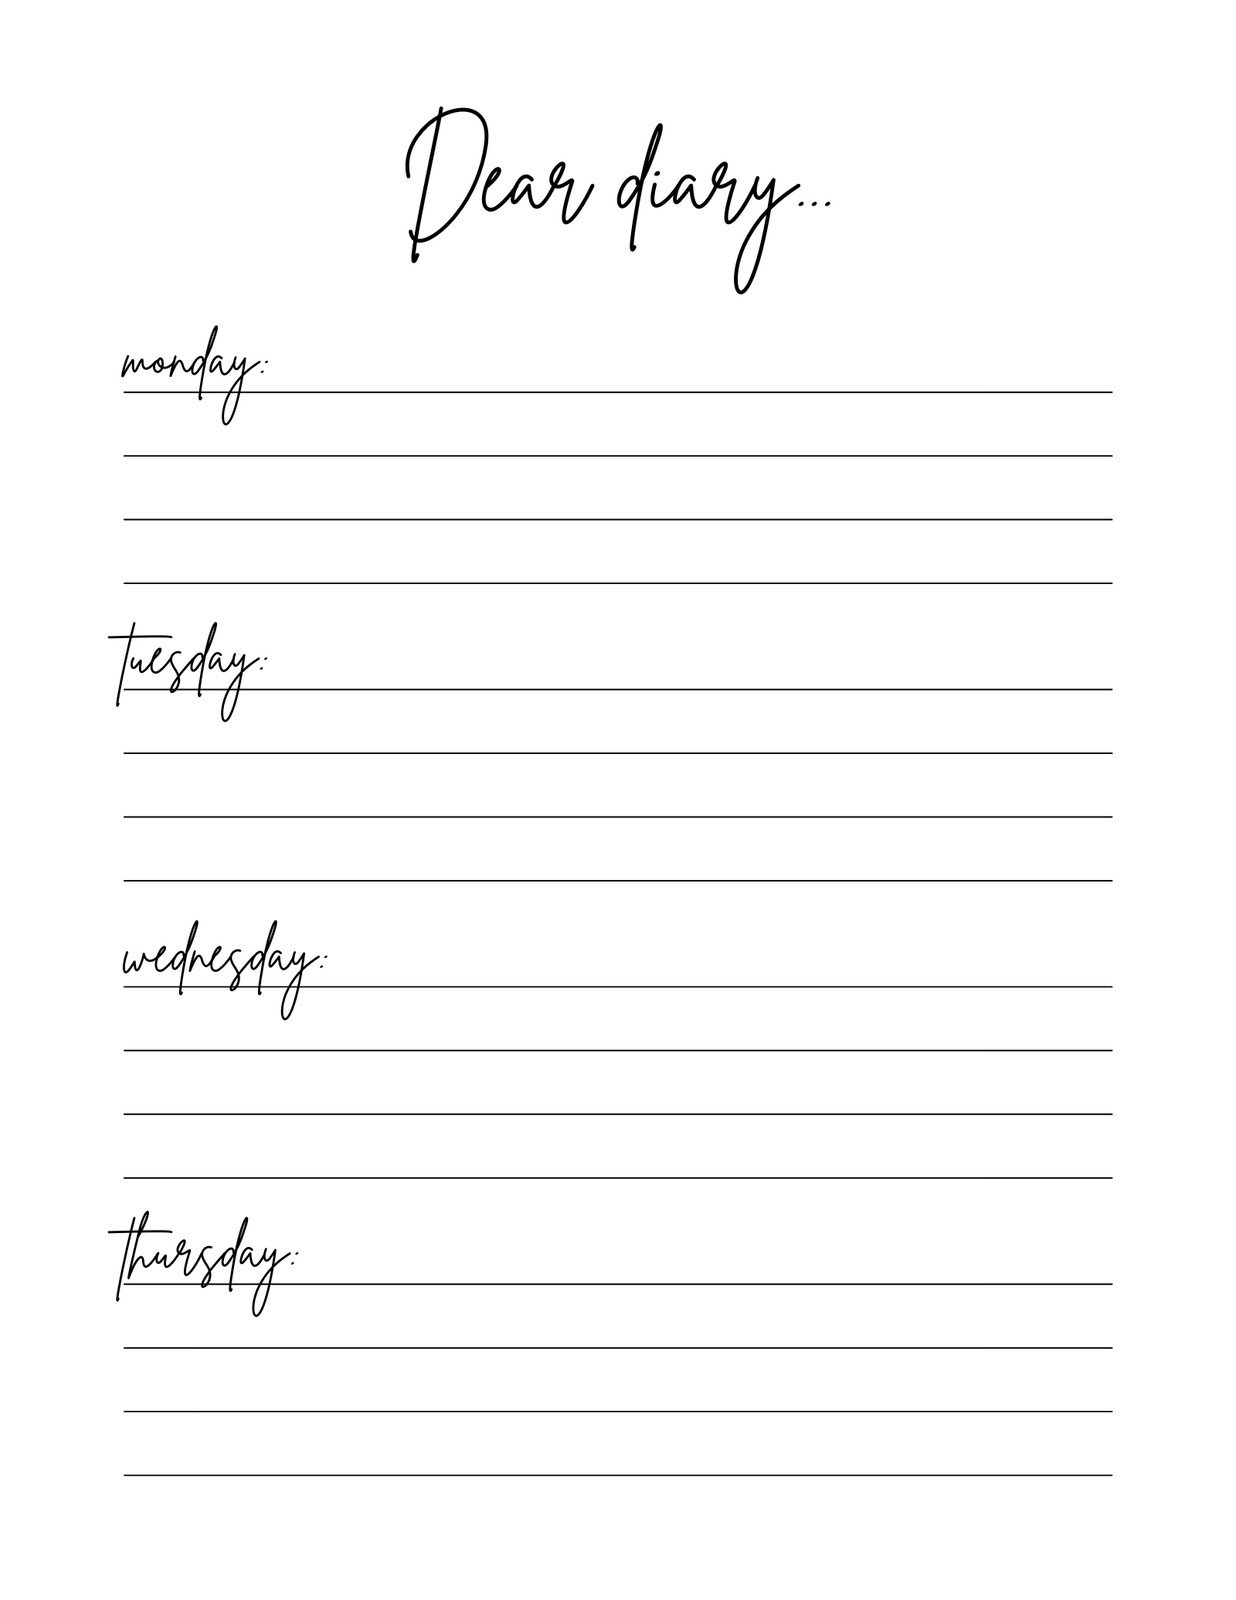 Free Printable Diary Templates You Can Customize Canva, 50% OFF